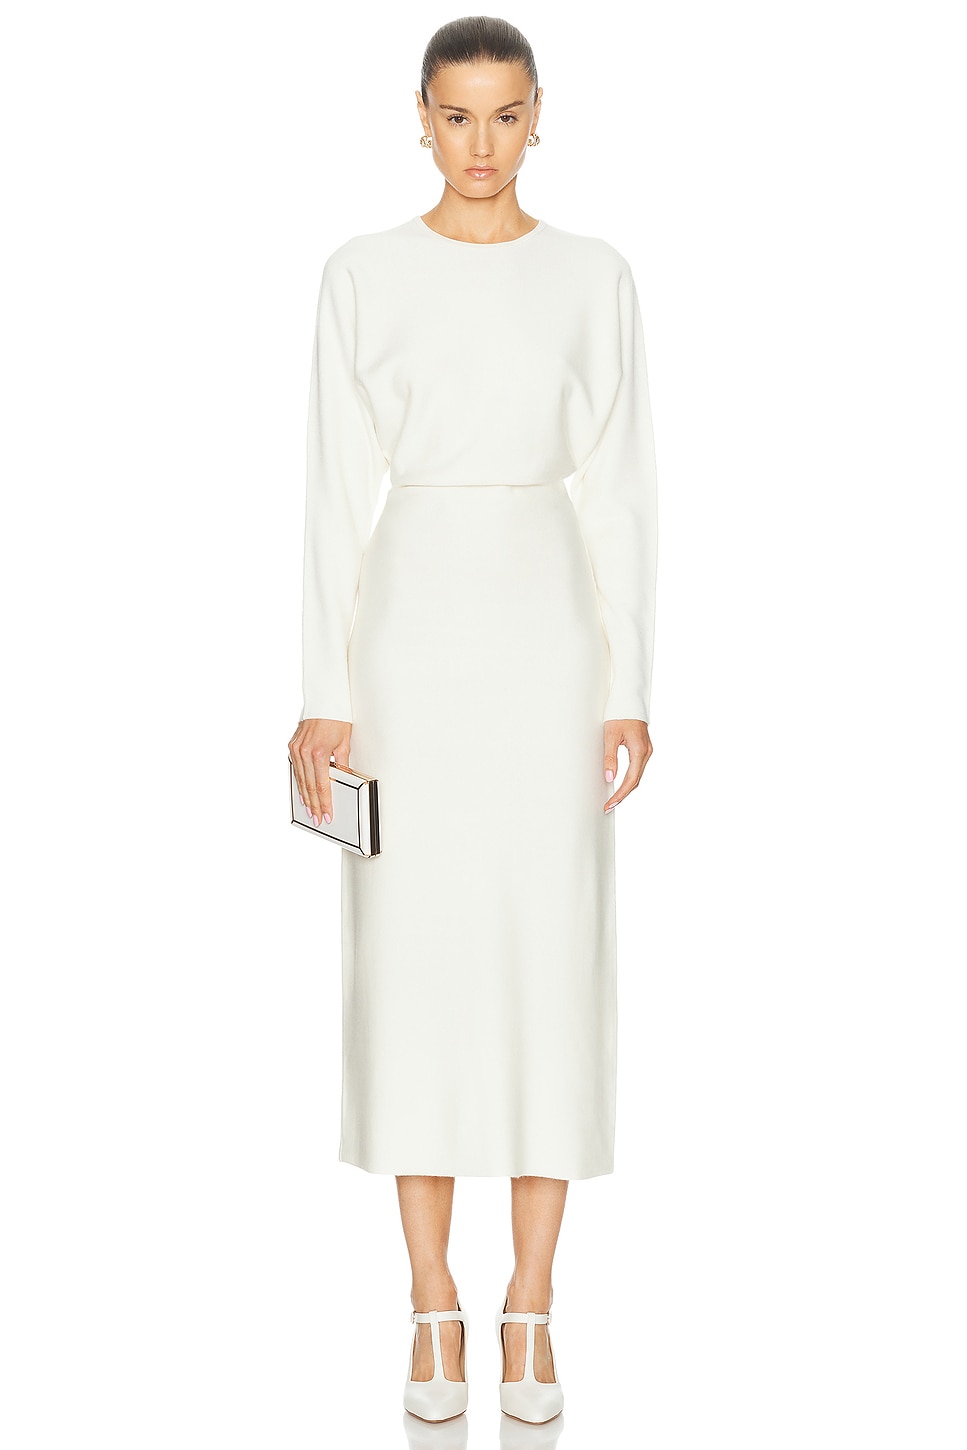 Image 1 of Gabriela Hearst Semaine Dress in Ivory